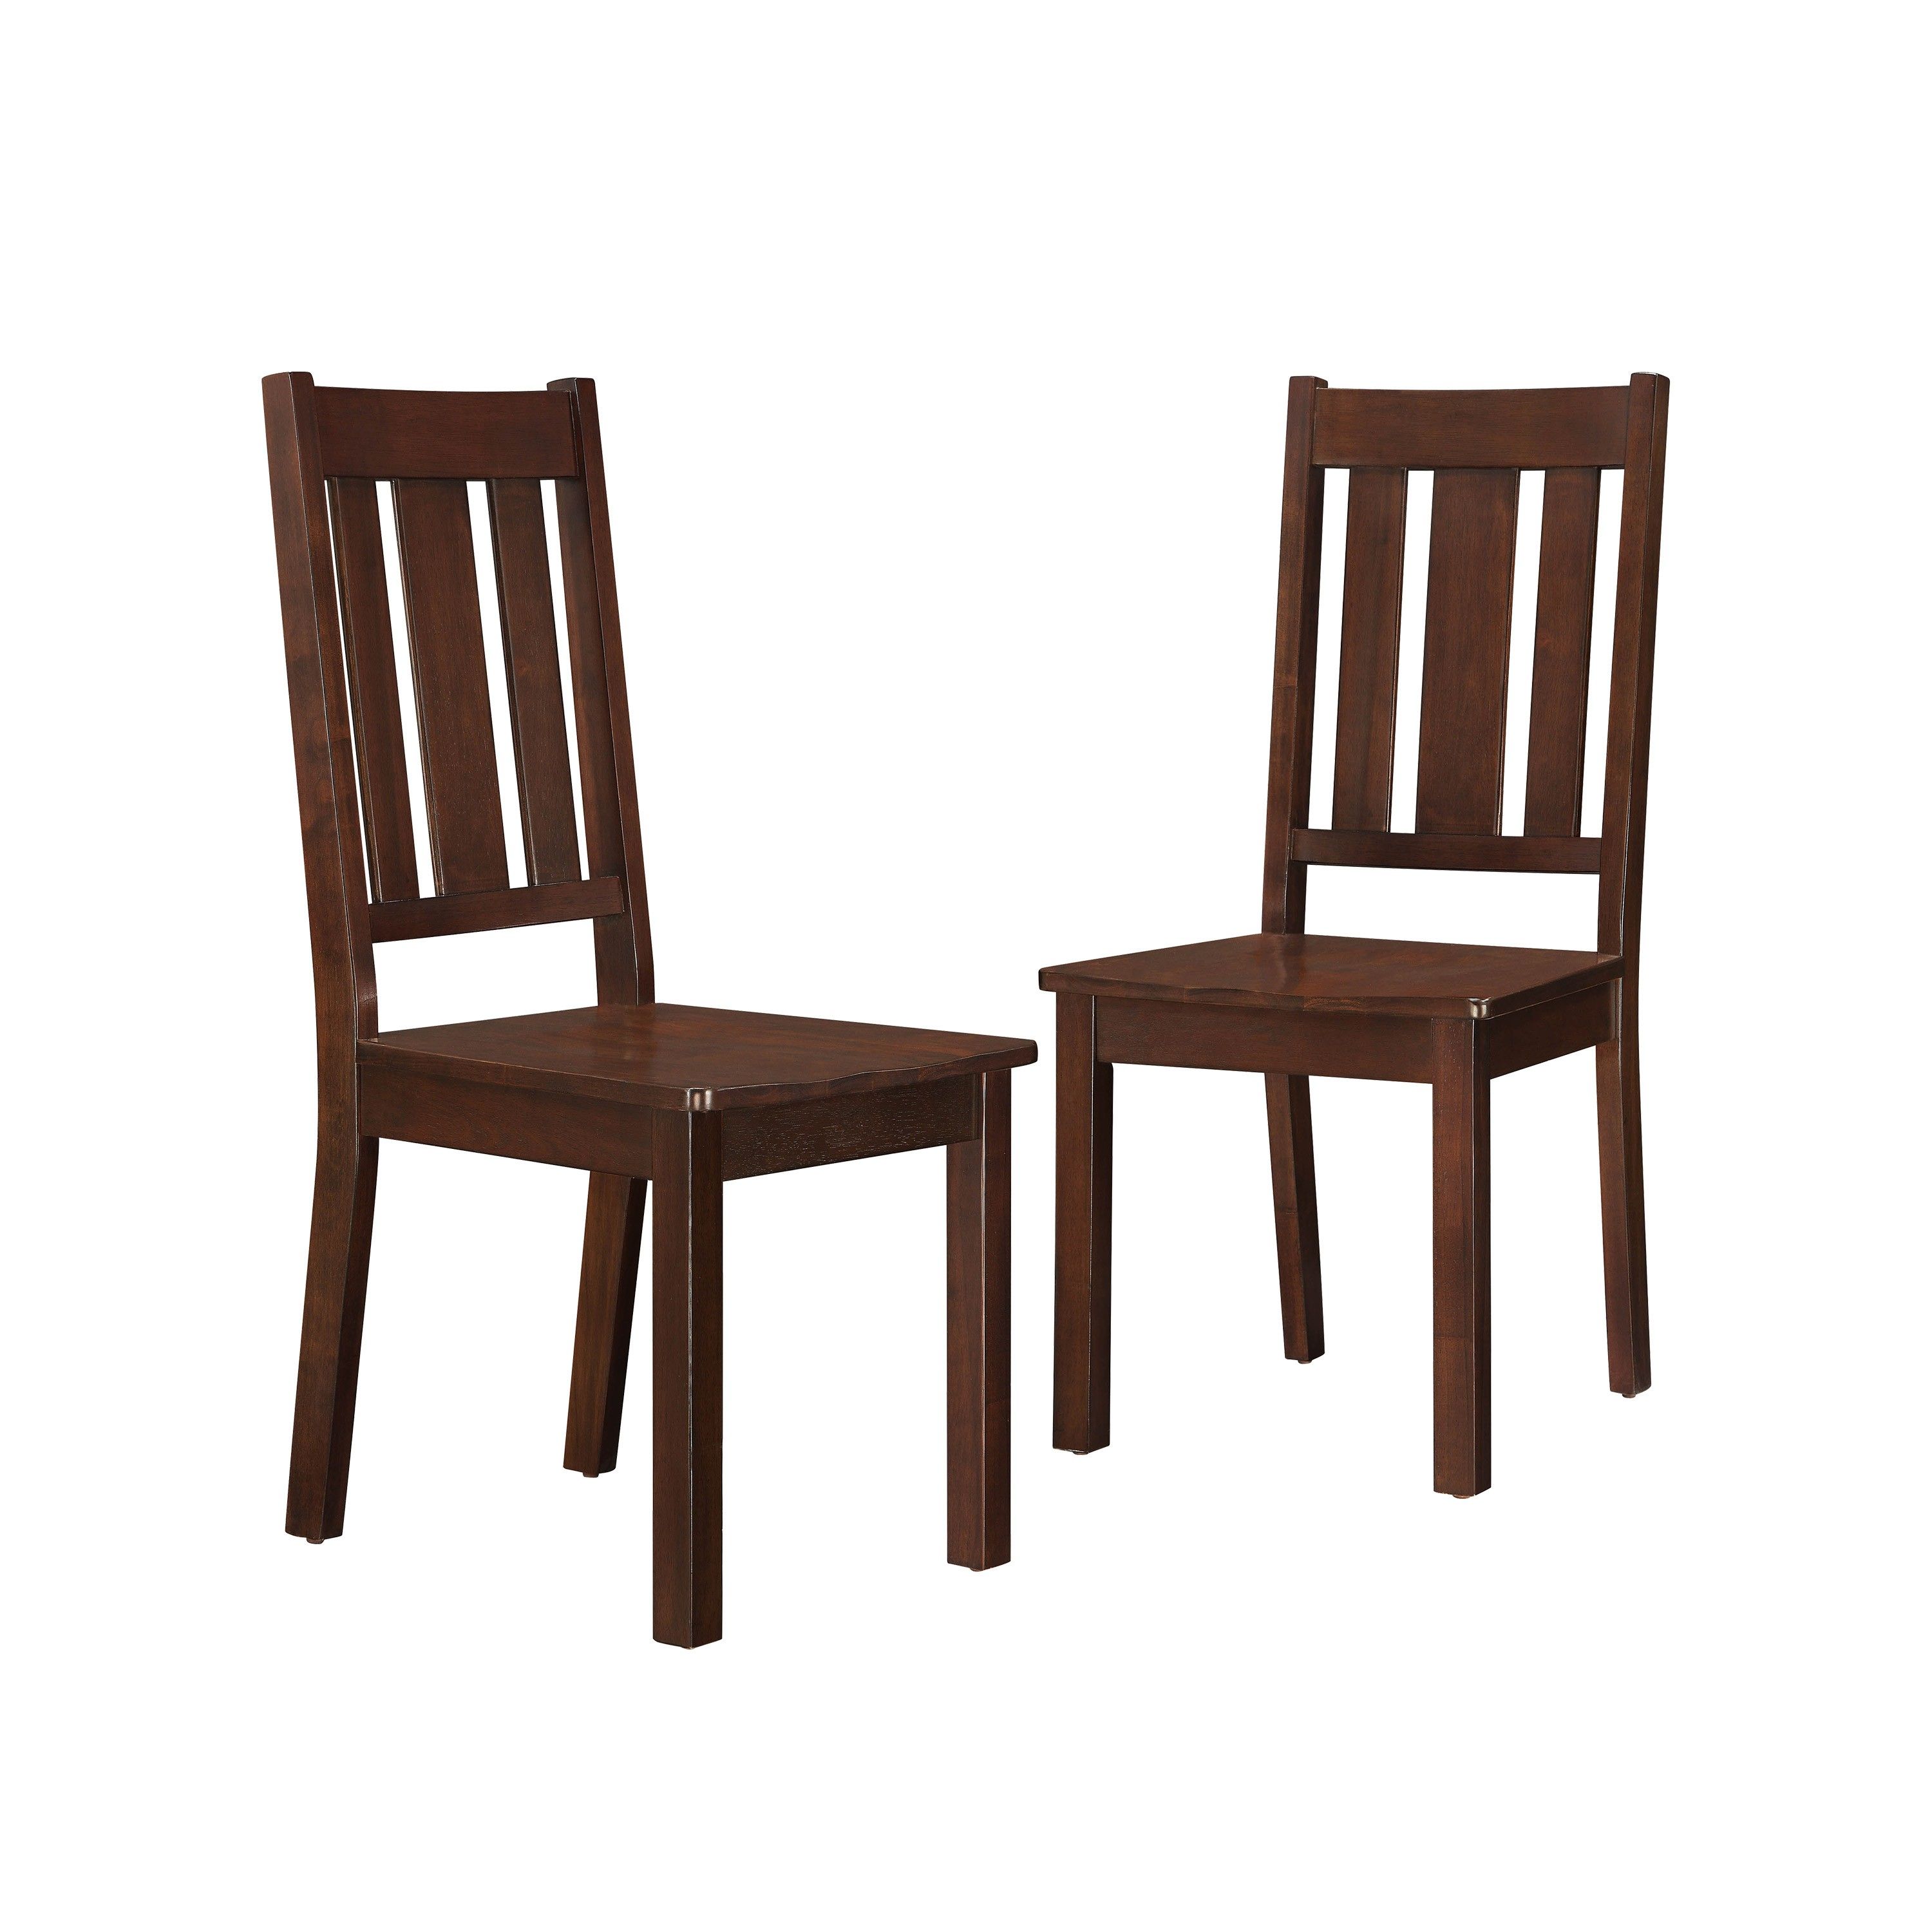 Dining Chairs, Black Dining Chairs, Upholstered Dining Chairs | Walmart (US)